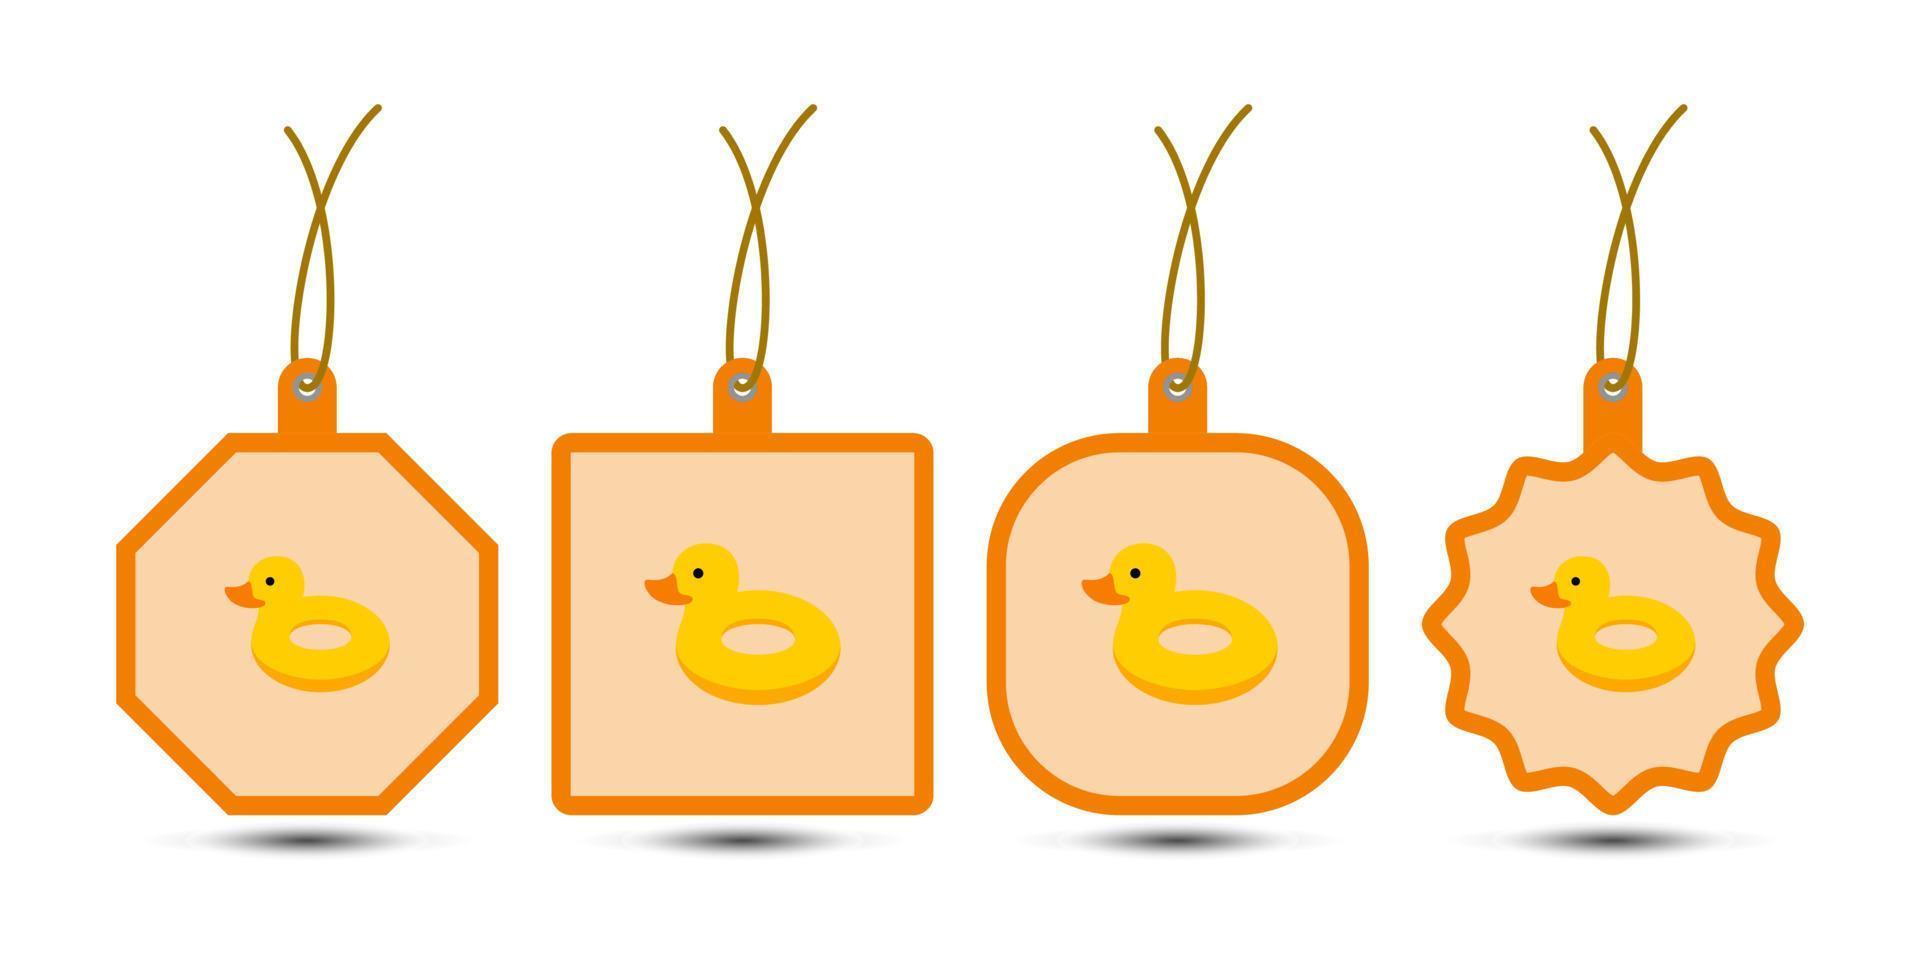 Set of Inflatable Duck tags with cord vector